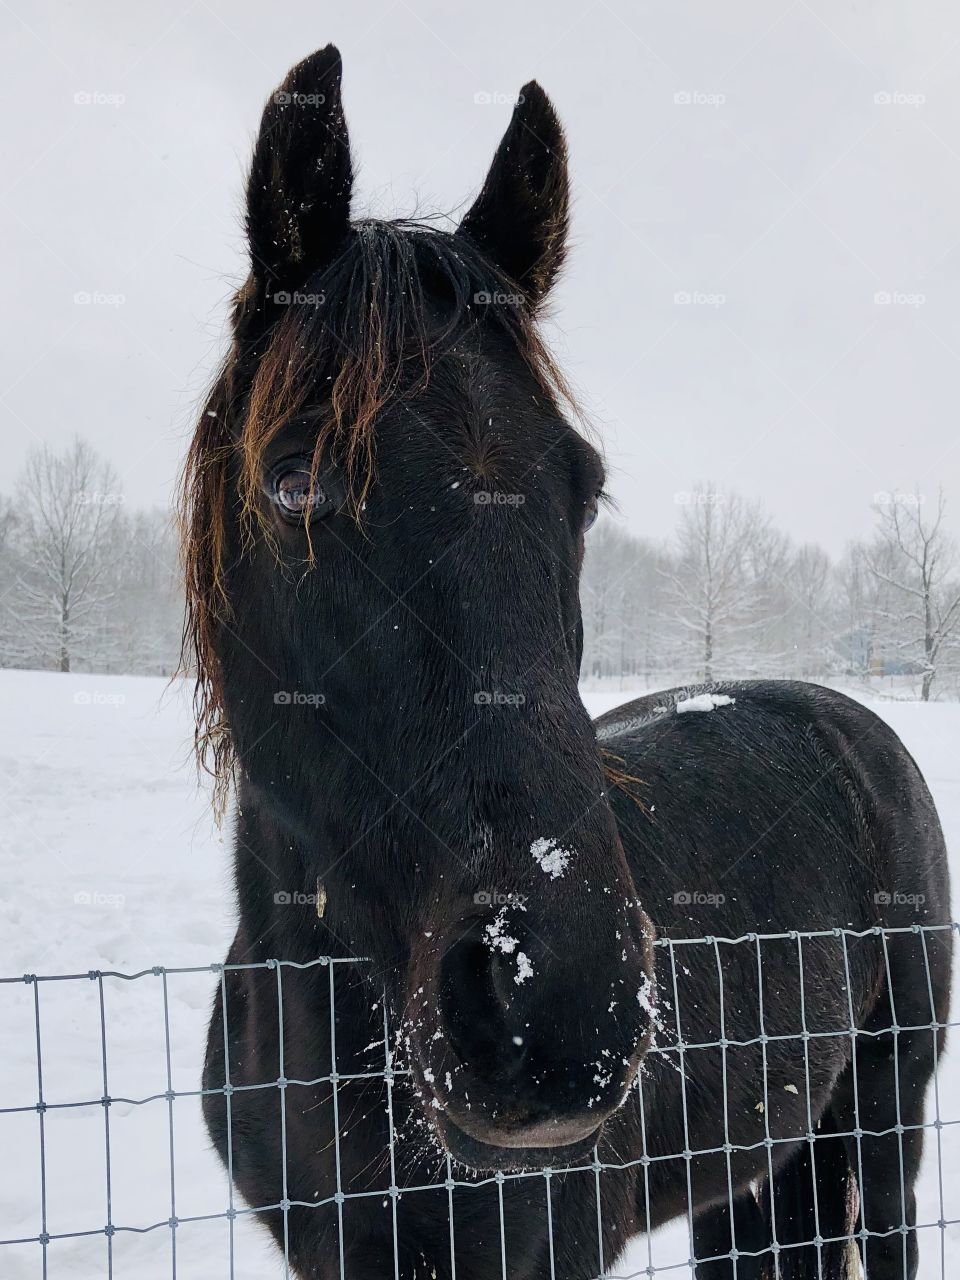 A Handsome Black Horse in the Winter Snow.